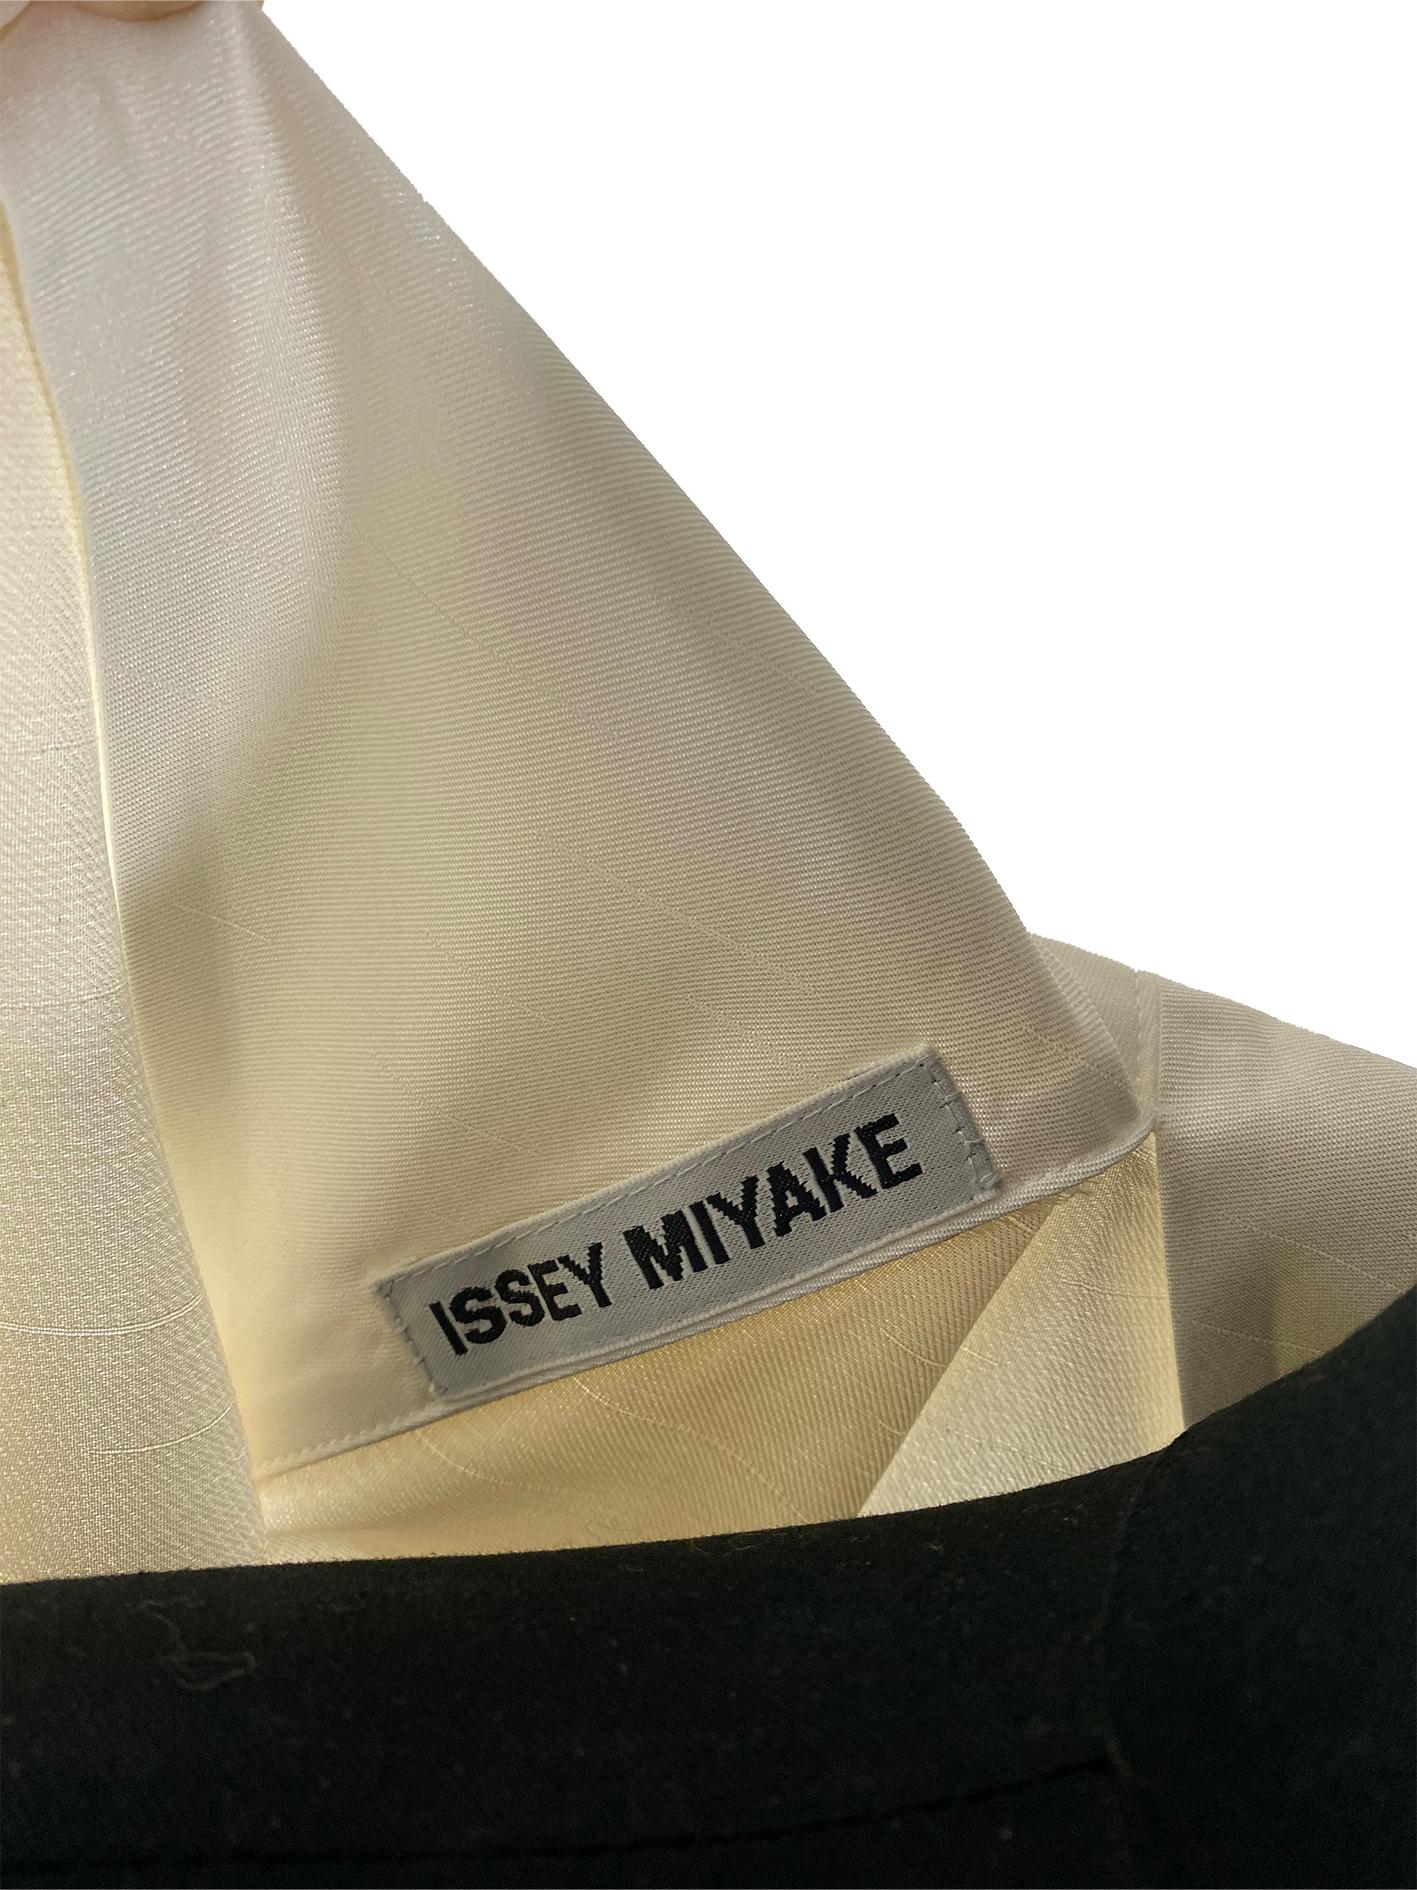 Women's 1990’s Issey Miyake Oatmeal, Cream And Off-White Silk Mixture Top For Sale